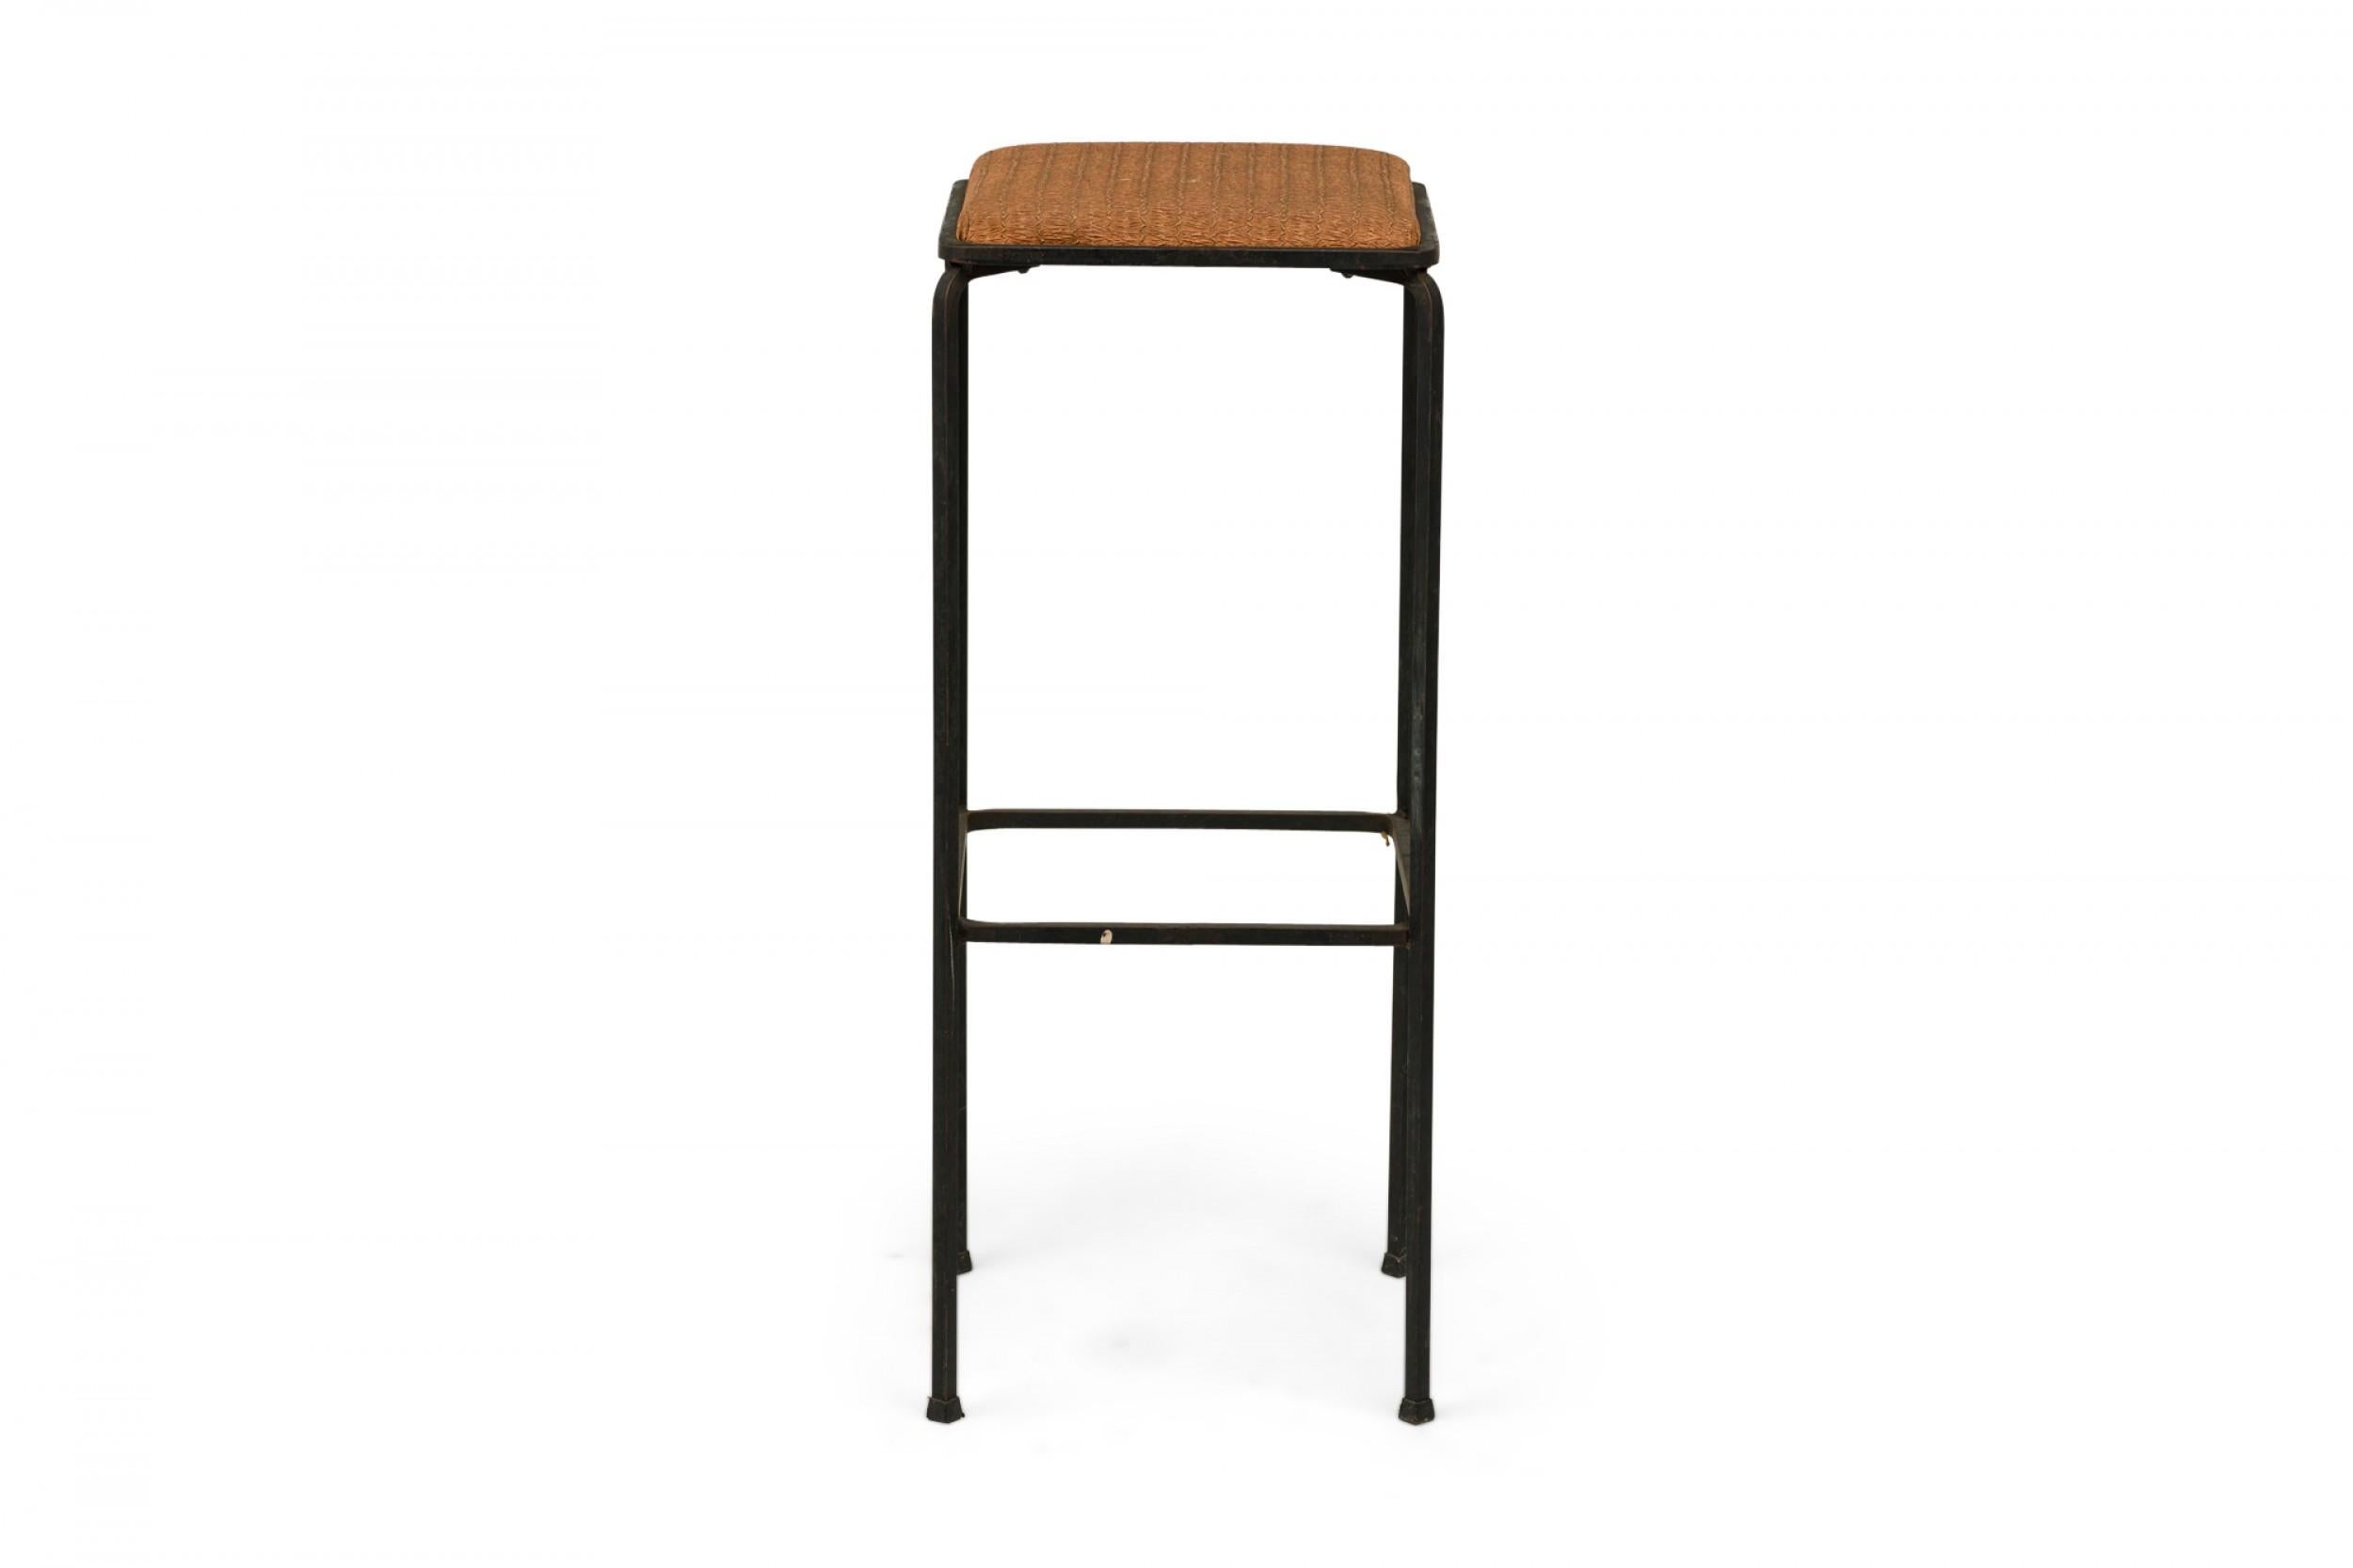 Set of 4 midcentury Italian square wrought iron frame bar stools with faux woven upholstered seats. (Manner of John Salterini)(Priced As Set)